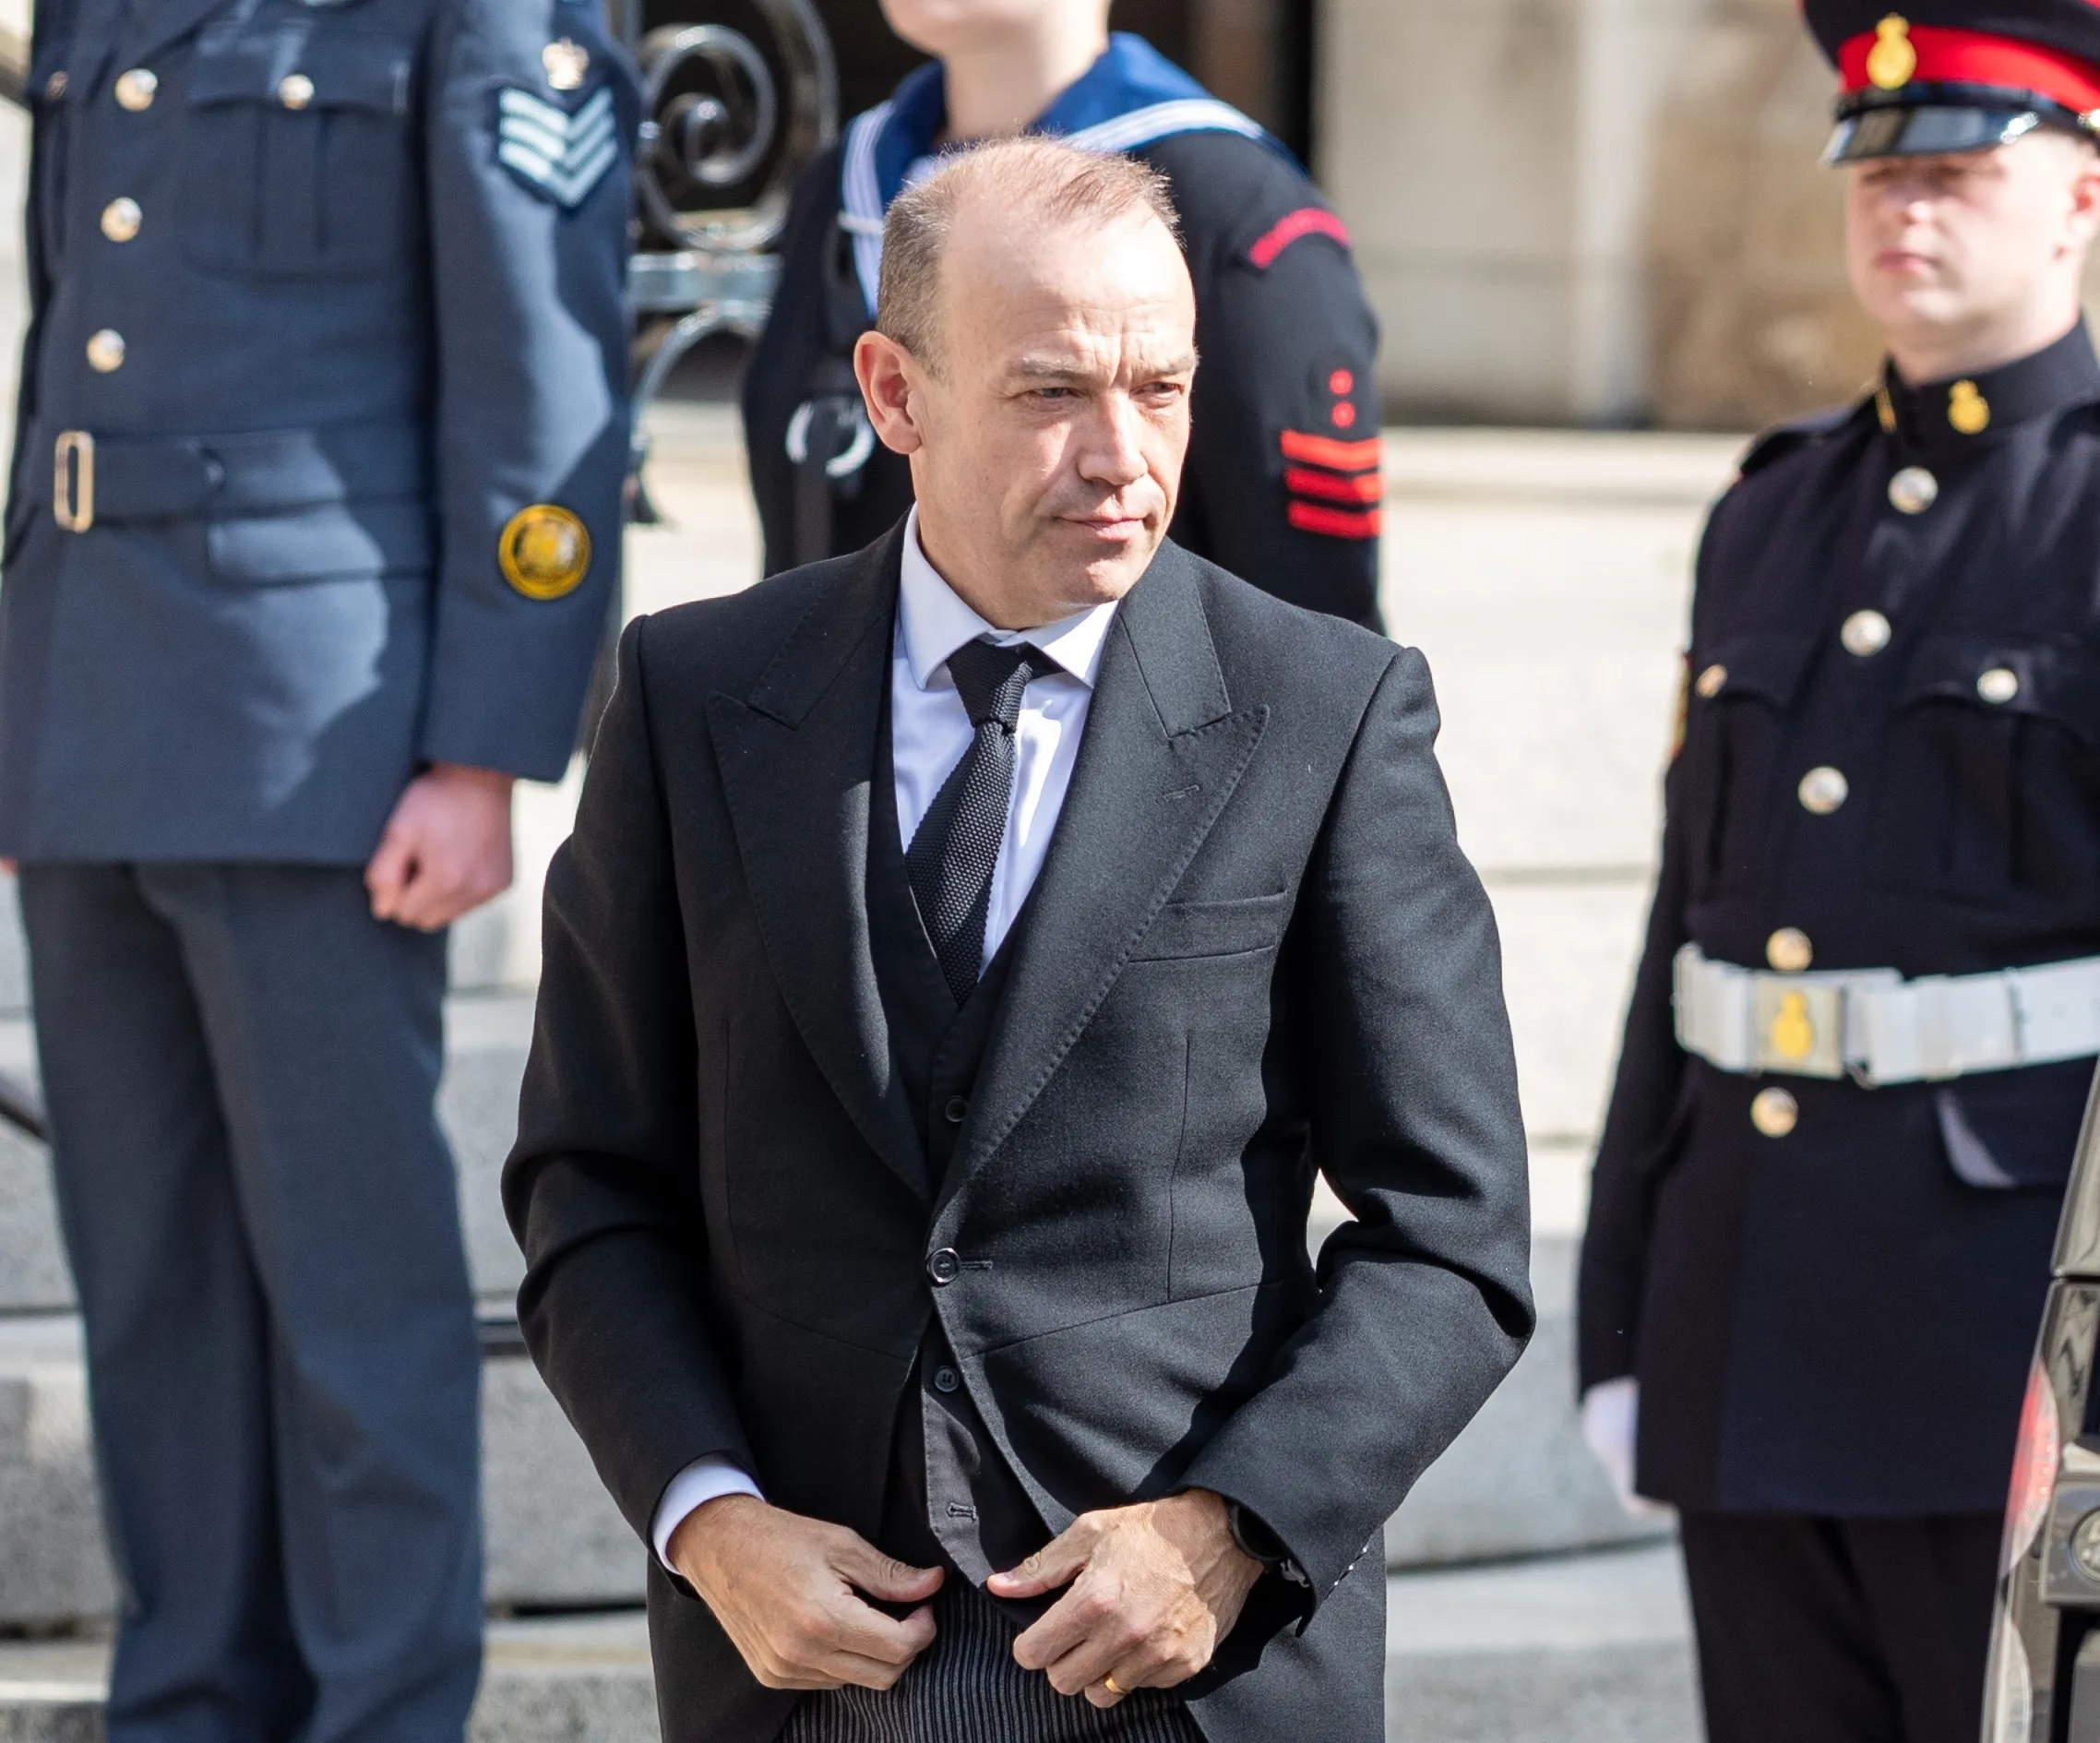 Secretary of State for Northern Ireland Chris Heaton-Harris arrives at St Anne's Cathedral for the Service of Reflection in Belfast on Sept. 13, 2022.?w=200&h=150